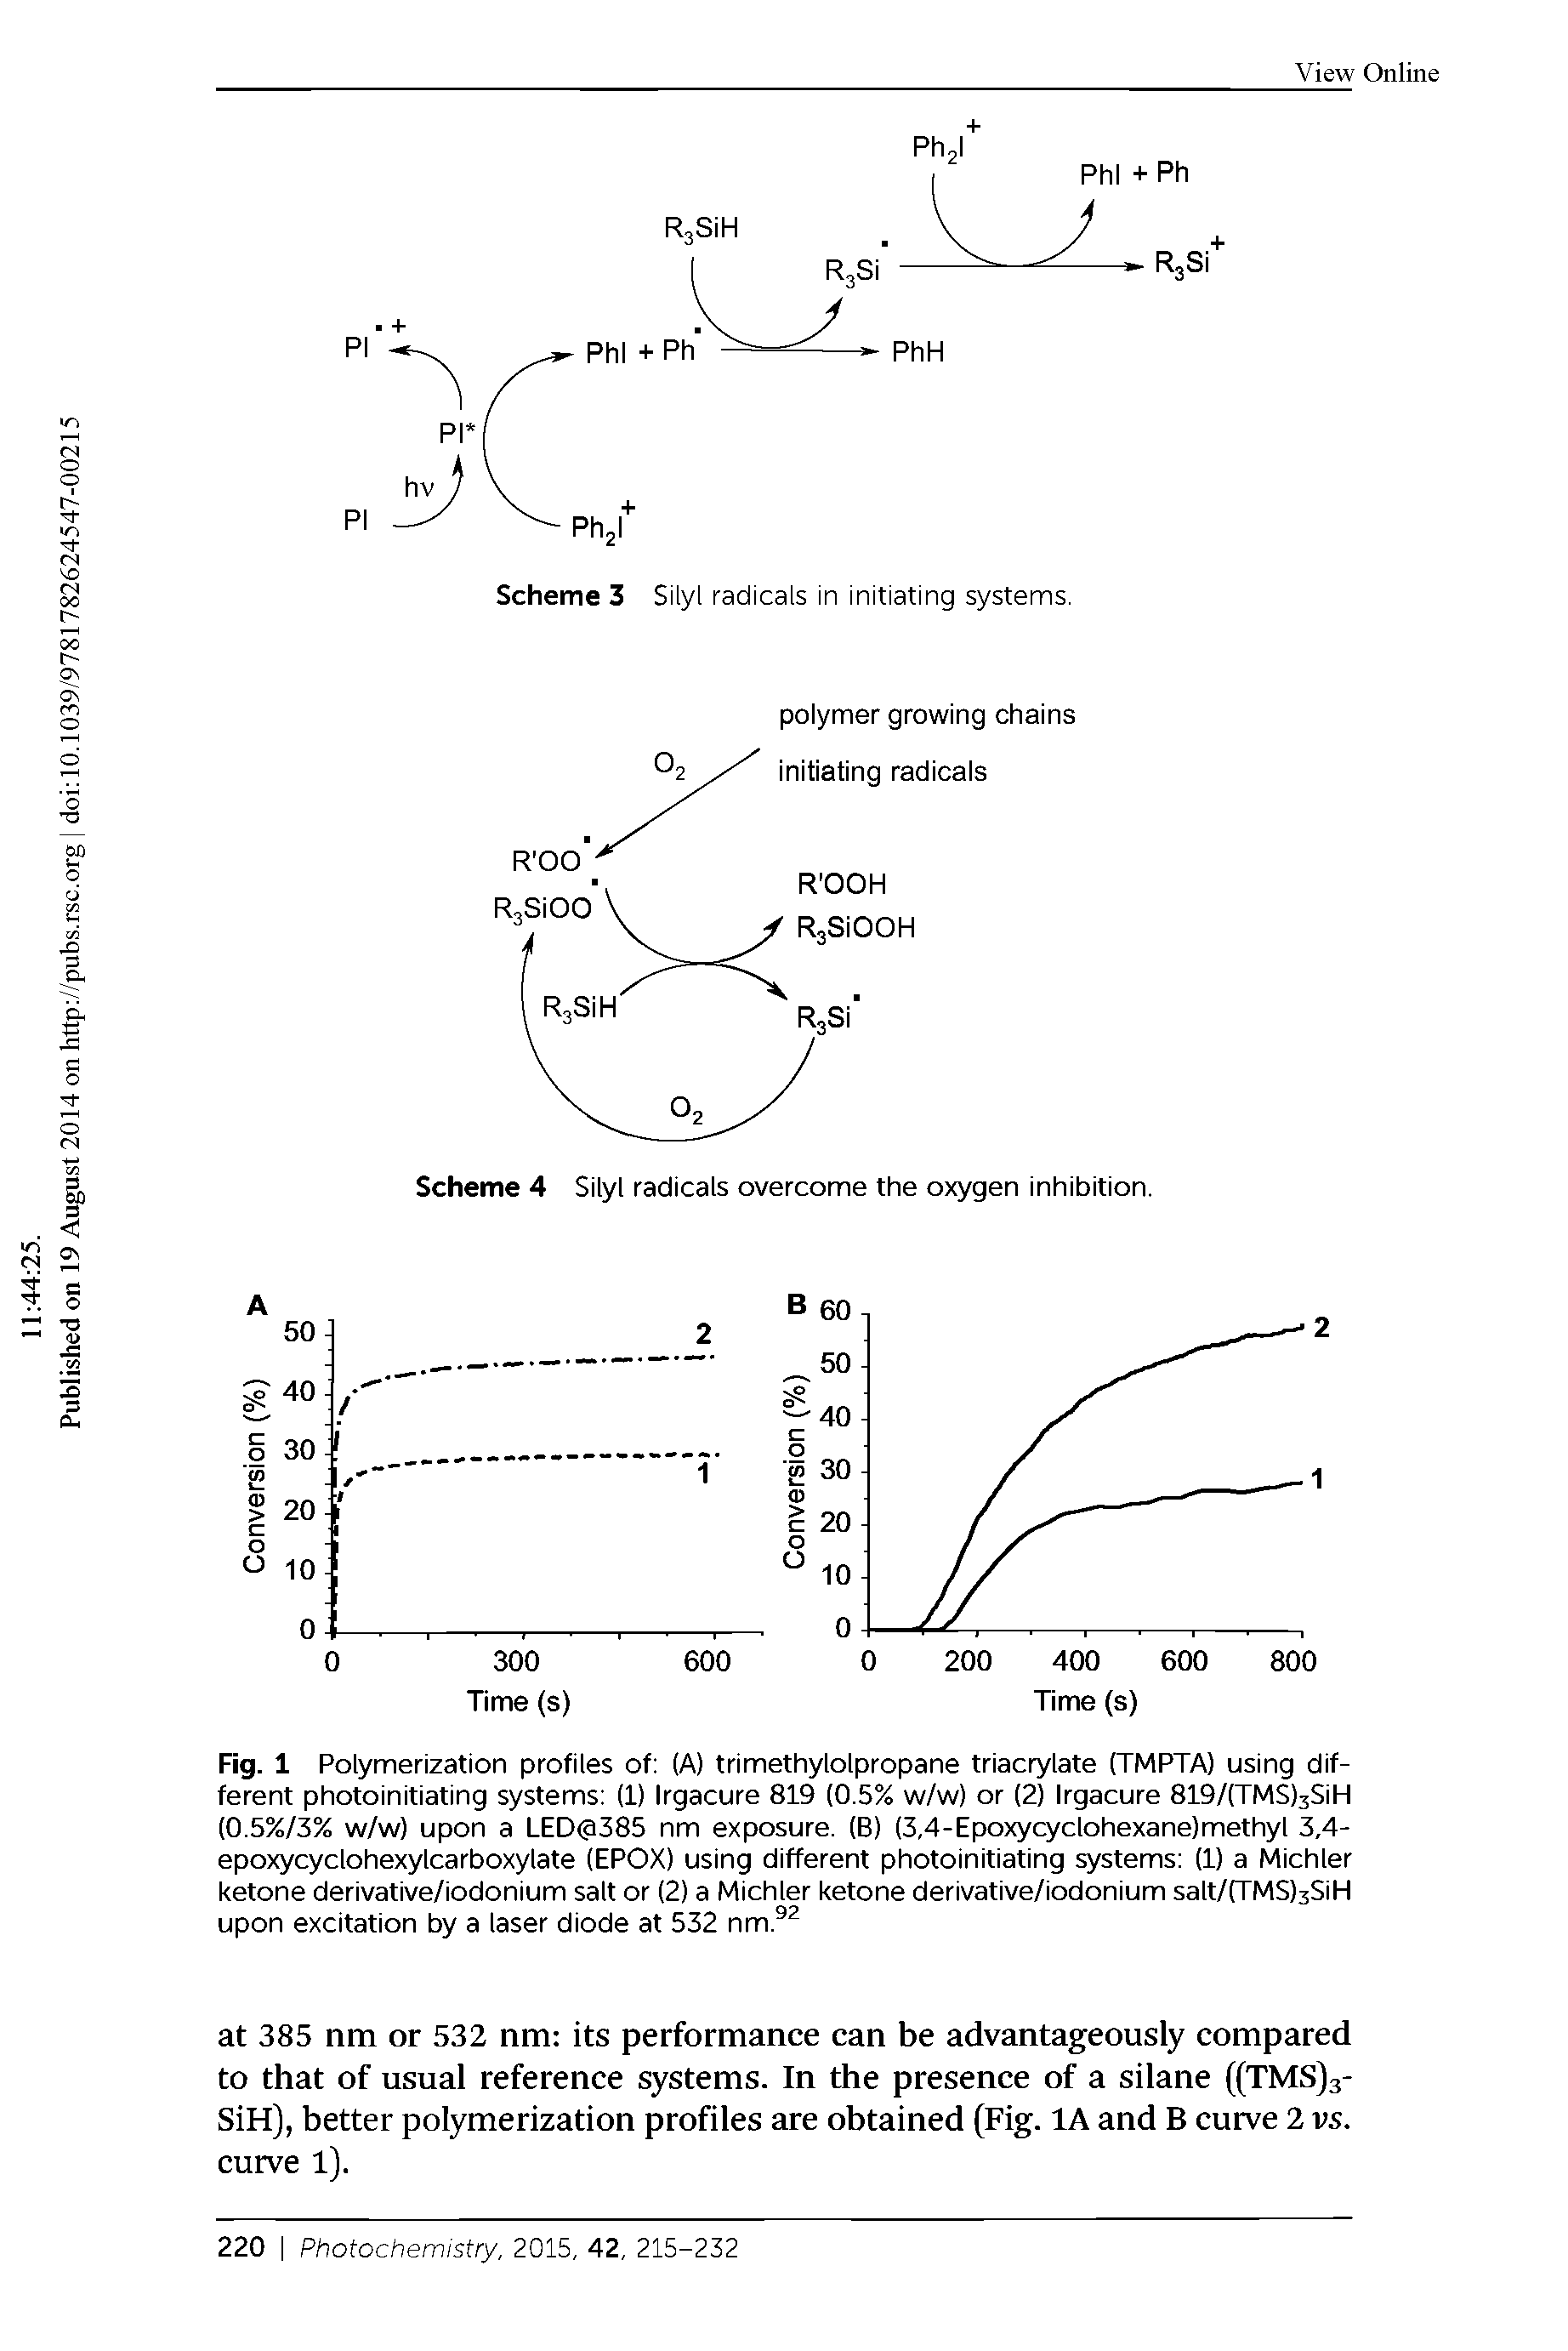 Fig. 1 Polymerization profiles of (A) trimethylolpropane triacrylate (TMPTA) using different photoinitiating systems (1) Irgacure 819 (0.5% w/w) or (2) Irgacure 819/(TMS)3SiH (0.5%/3% w/w) upon a LED(3385 nm exposure. (B) (3,4-Epoxycyclohexane)methyl 3,4-epoxycyclohexylcarboxylate (EPOX) using different photoinitiating systems (1) a Michler ketone derivative/iodonium salt or (2) a Michler ketone derivative/iodonium salt/(TMS)3SiH upon excitation by a laser diode at 532 nm. ...